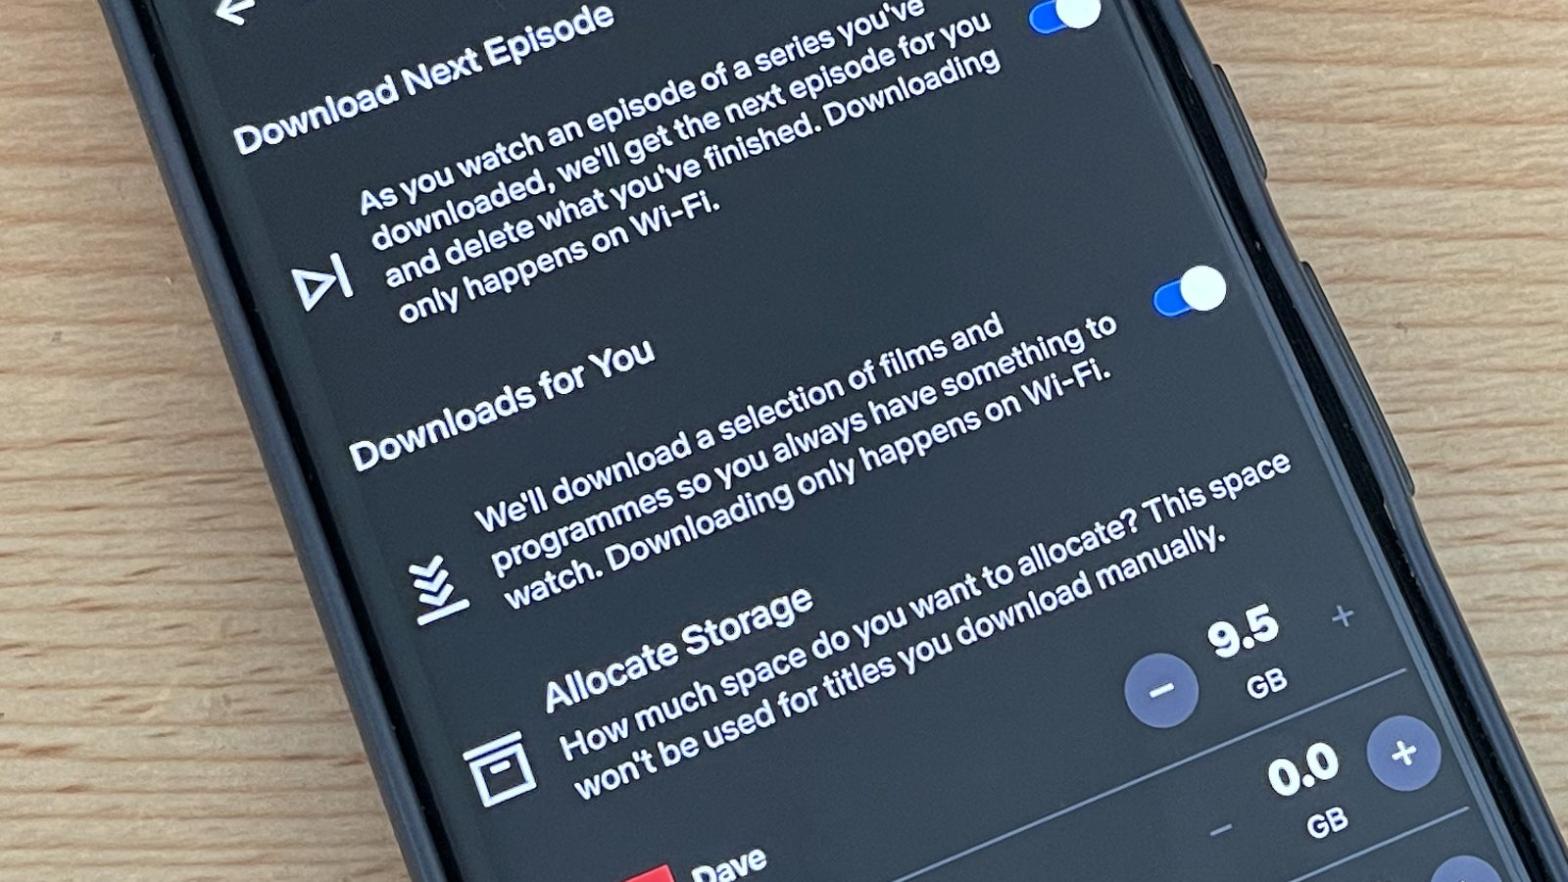 Netflix is one app with an auto download option. (Photo: David Nield/Gizmodo)